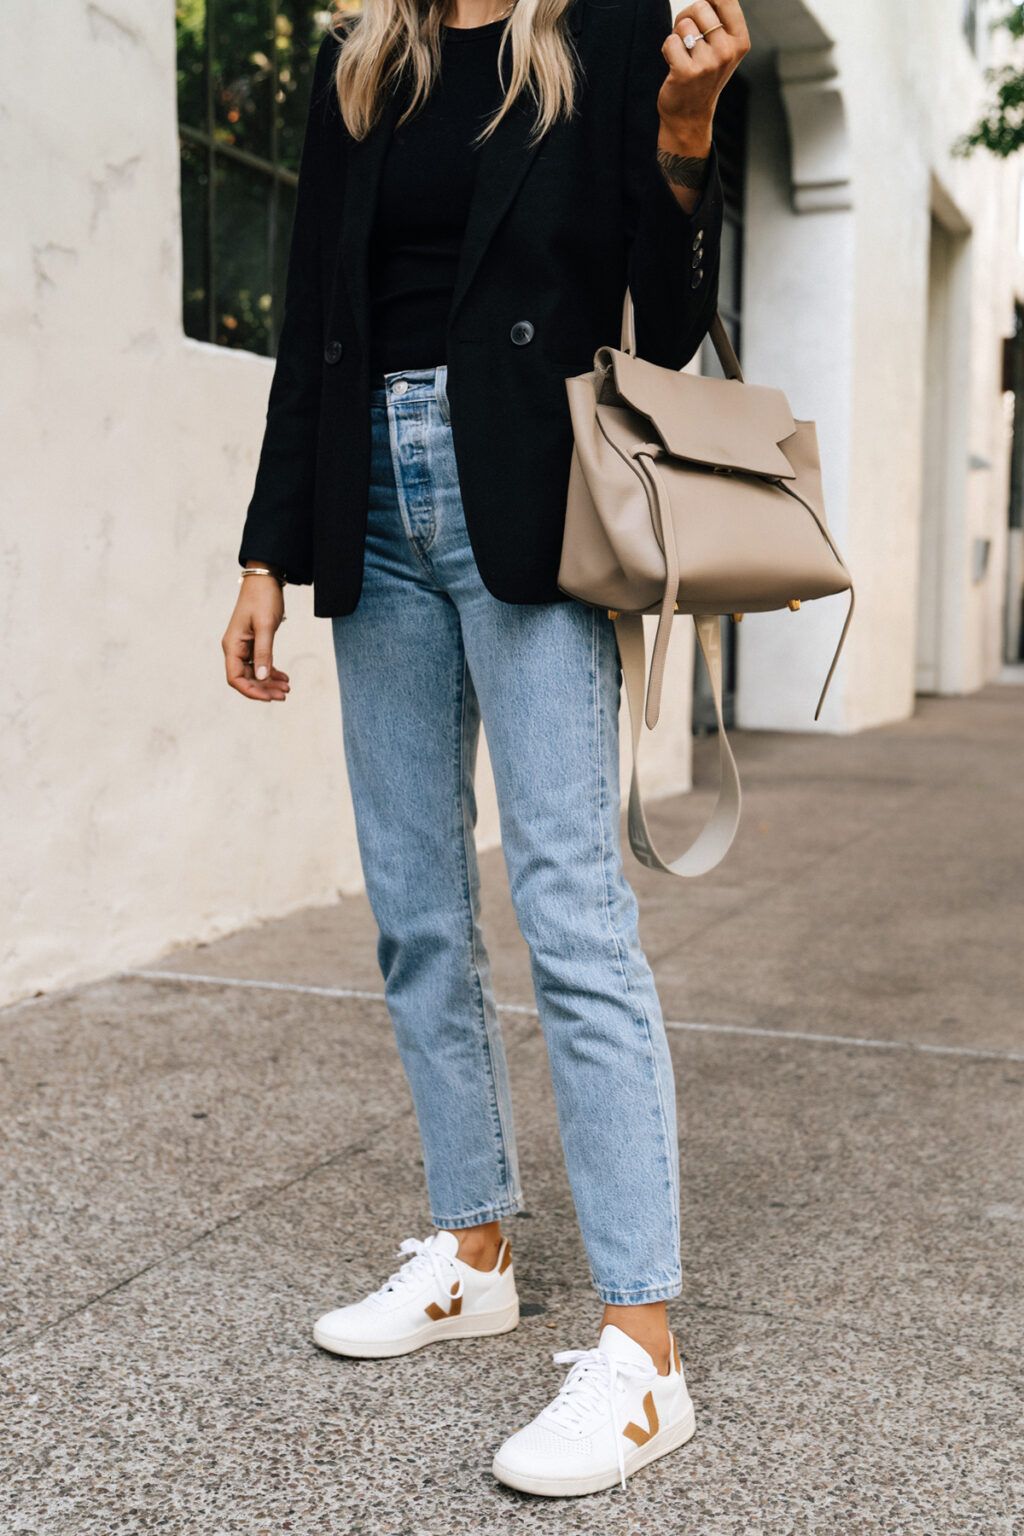 Iconic Levis Jeans for Timeless Style